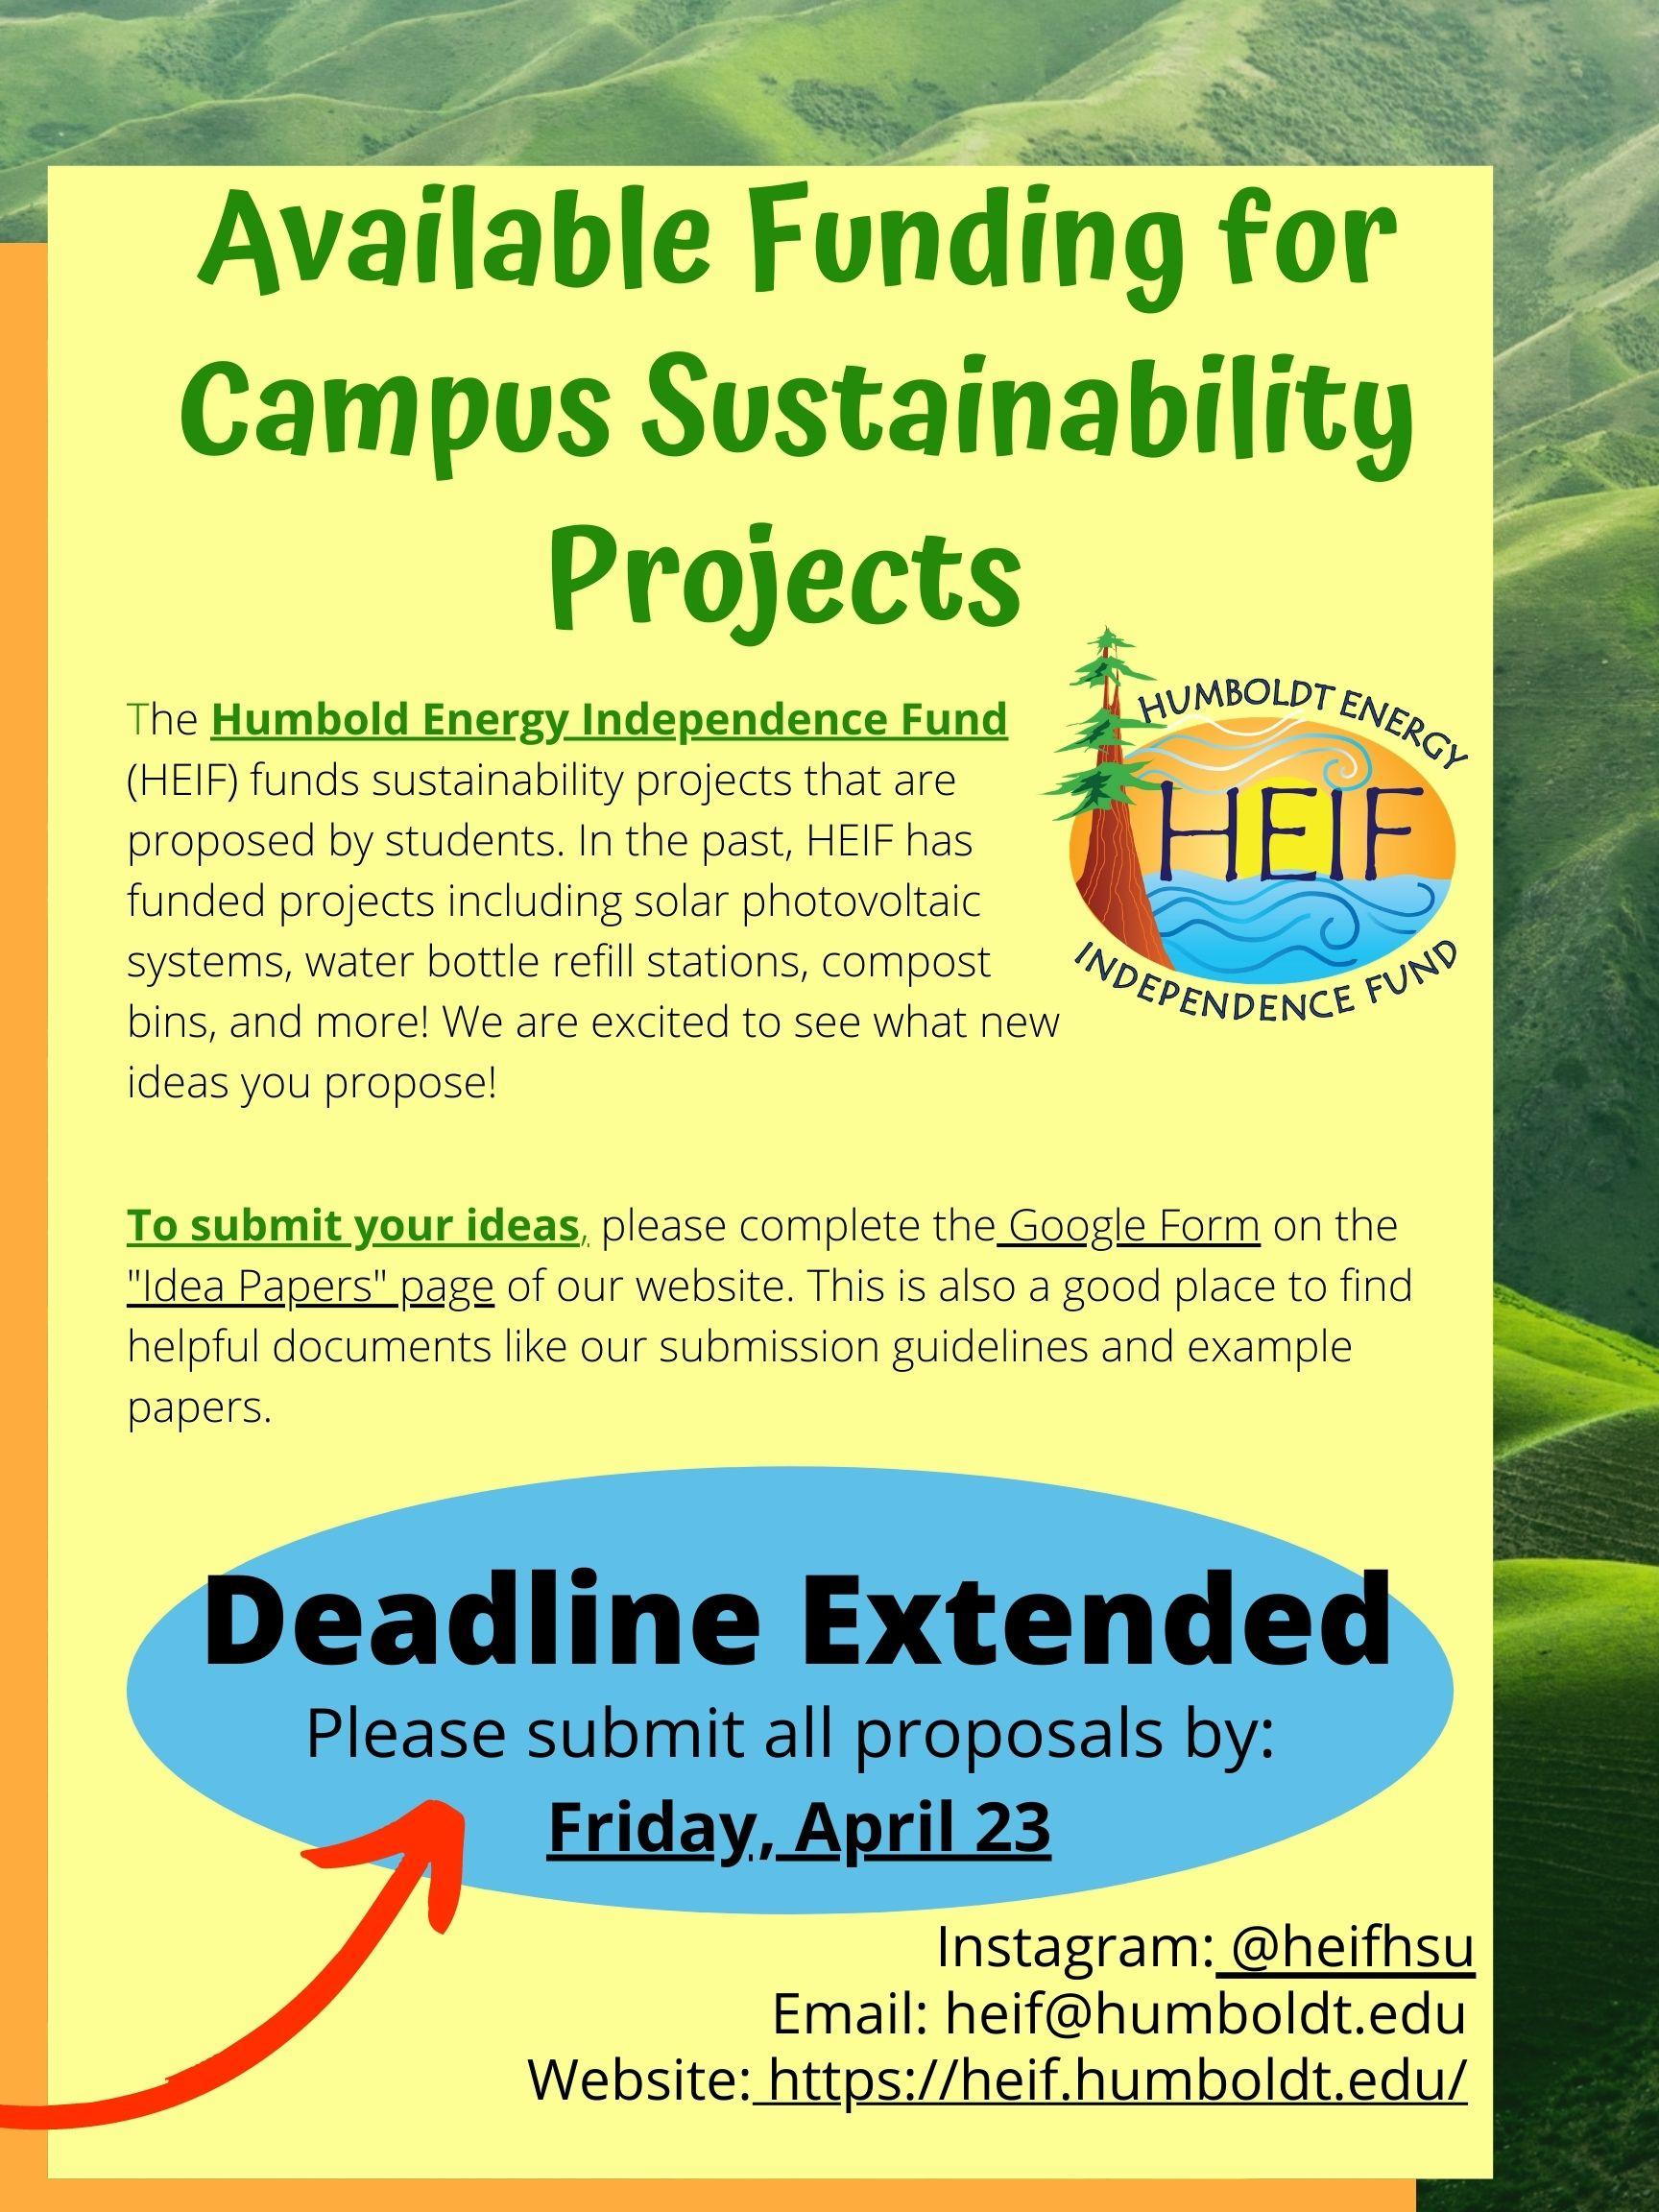 Deadline Extended: Please submit all proposals by Friday, April 23.